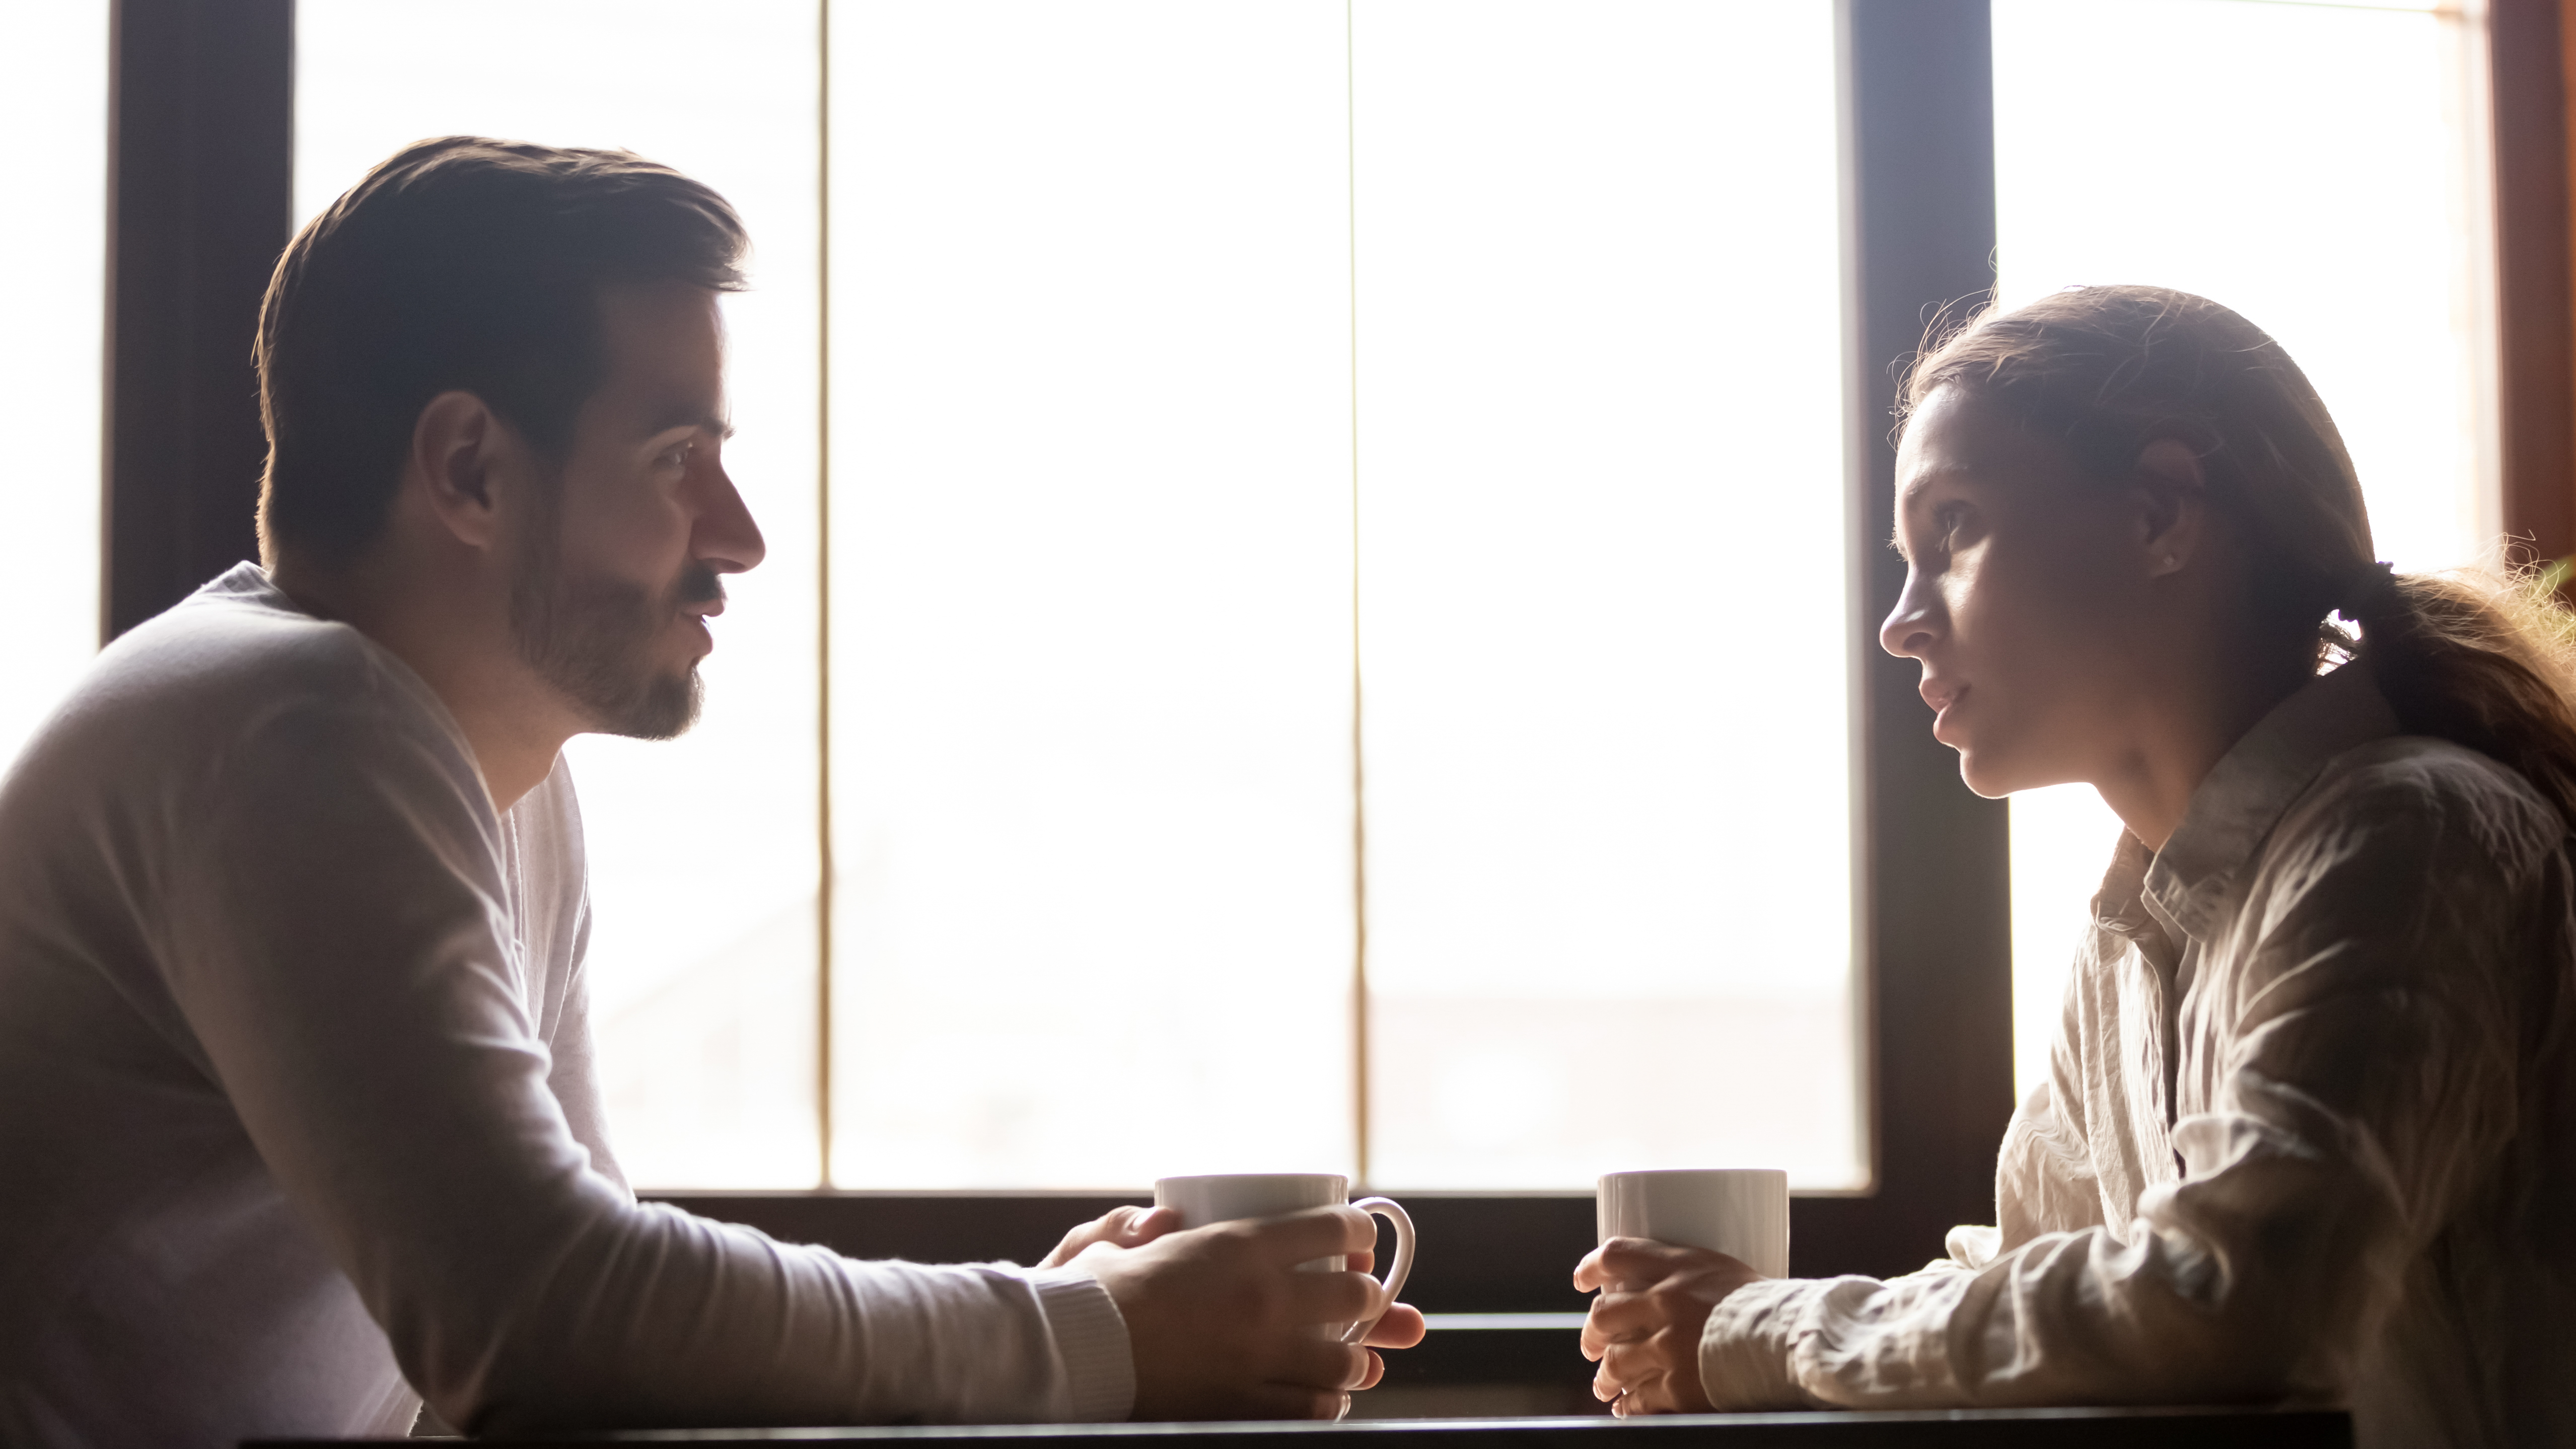 Man and woman have serious talk. | Source: Shutterstock